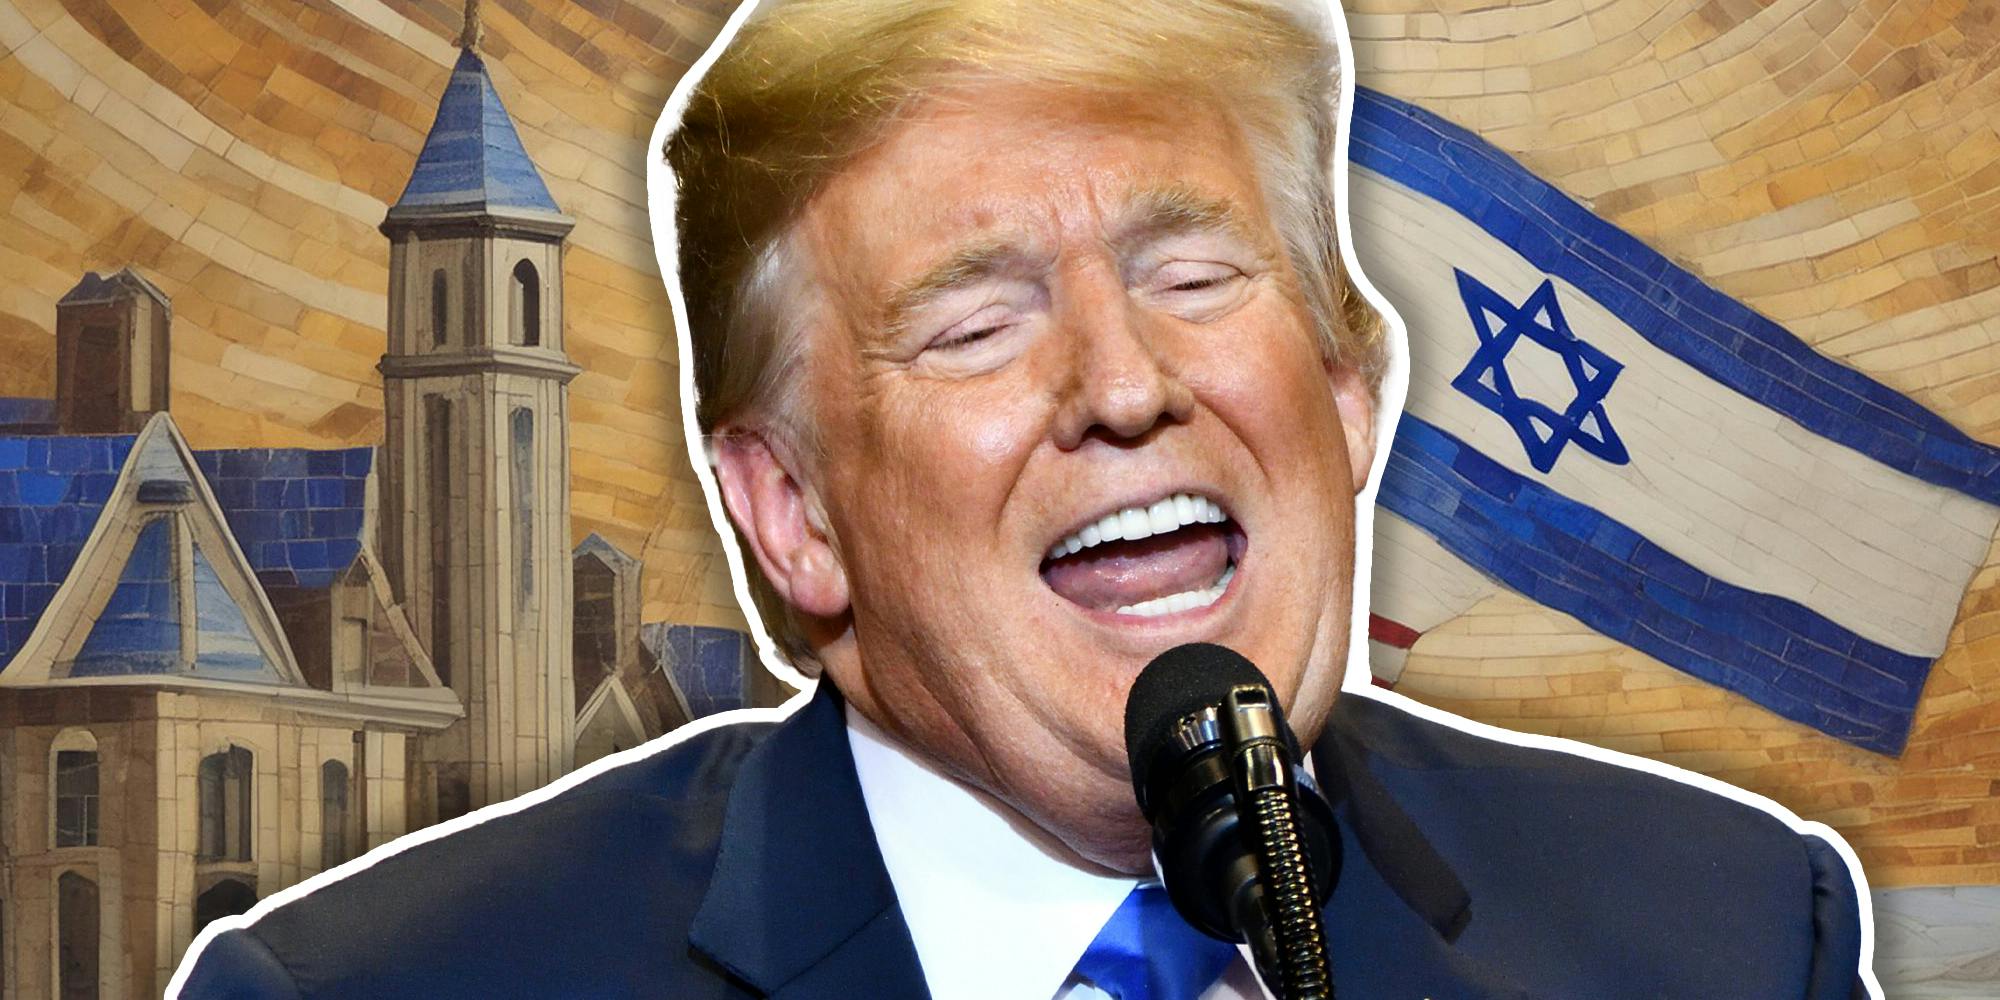 ‘You have to clean out the cancer’: Trump slams pro-Palestine college campuses and forcefully backs Israel’s war in Gaza